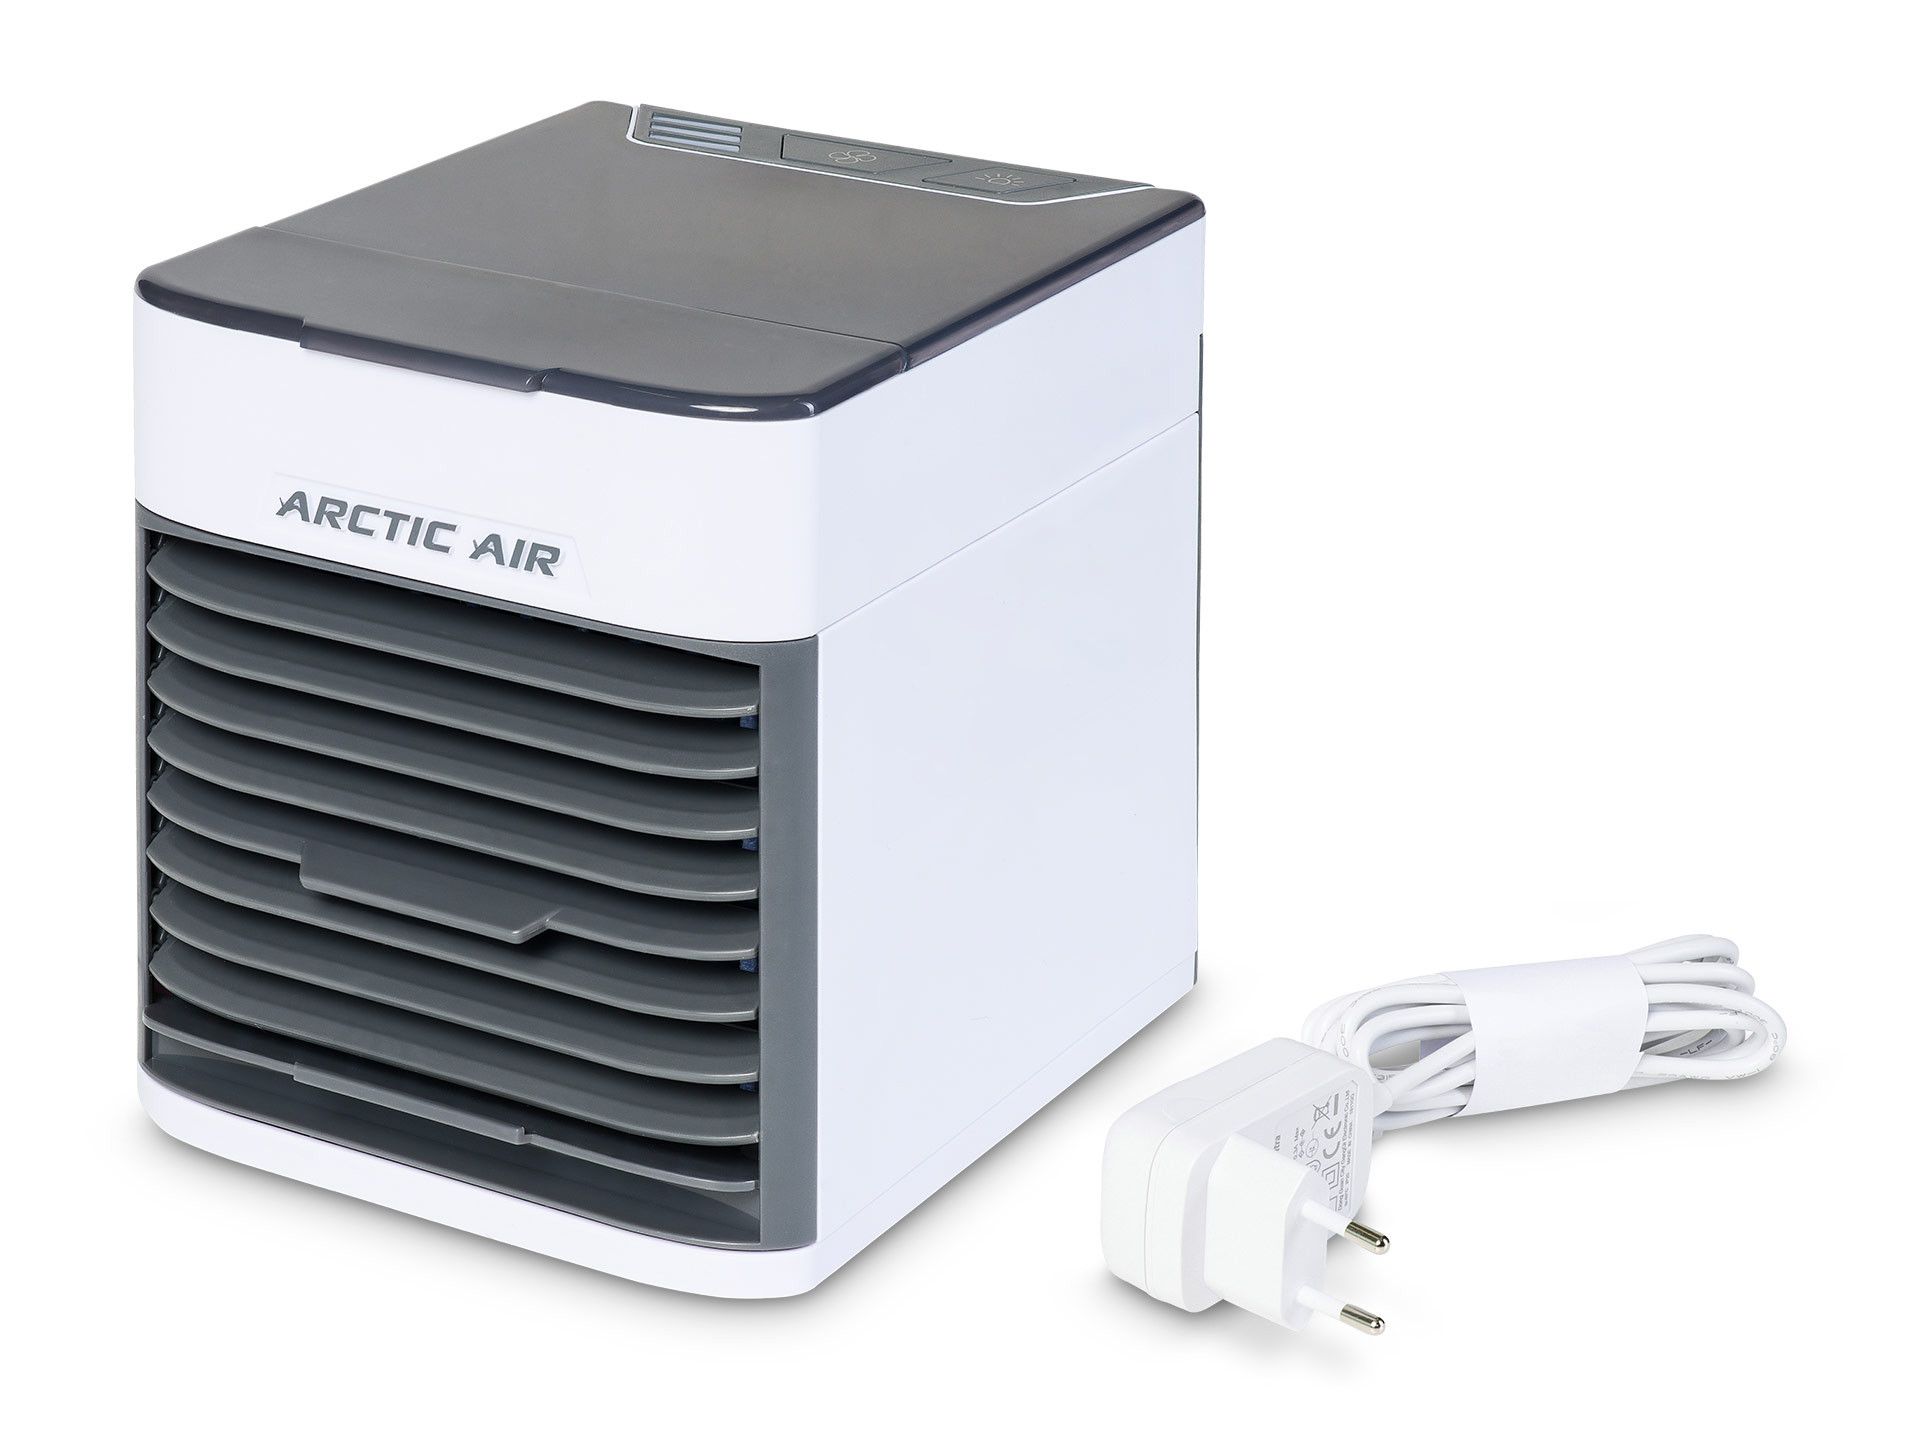 Arctic Air Cooler Overview: Price, Reviews & Best Alternatives